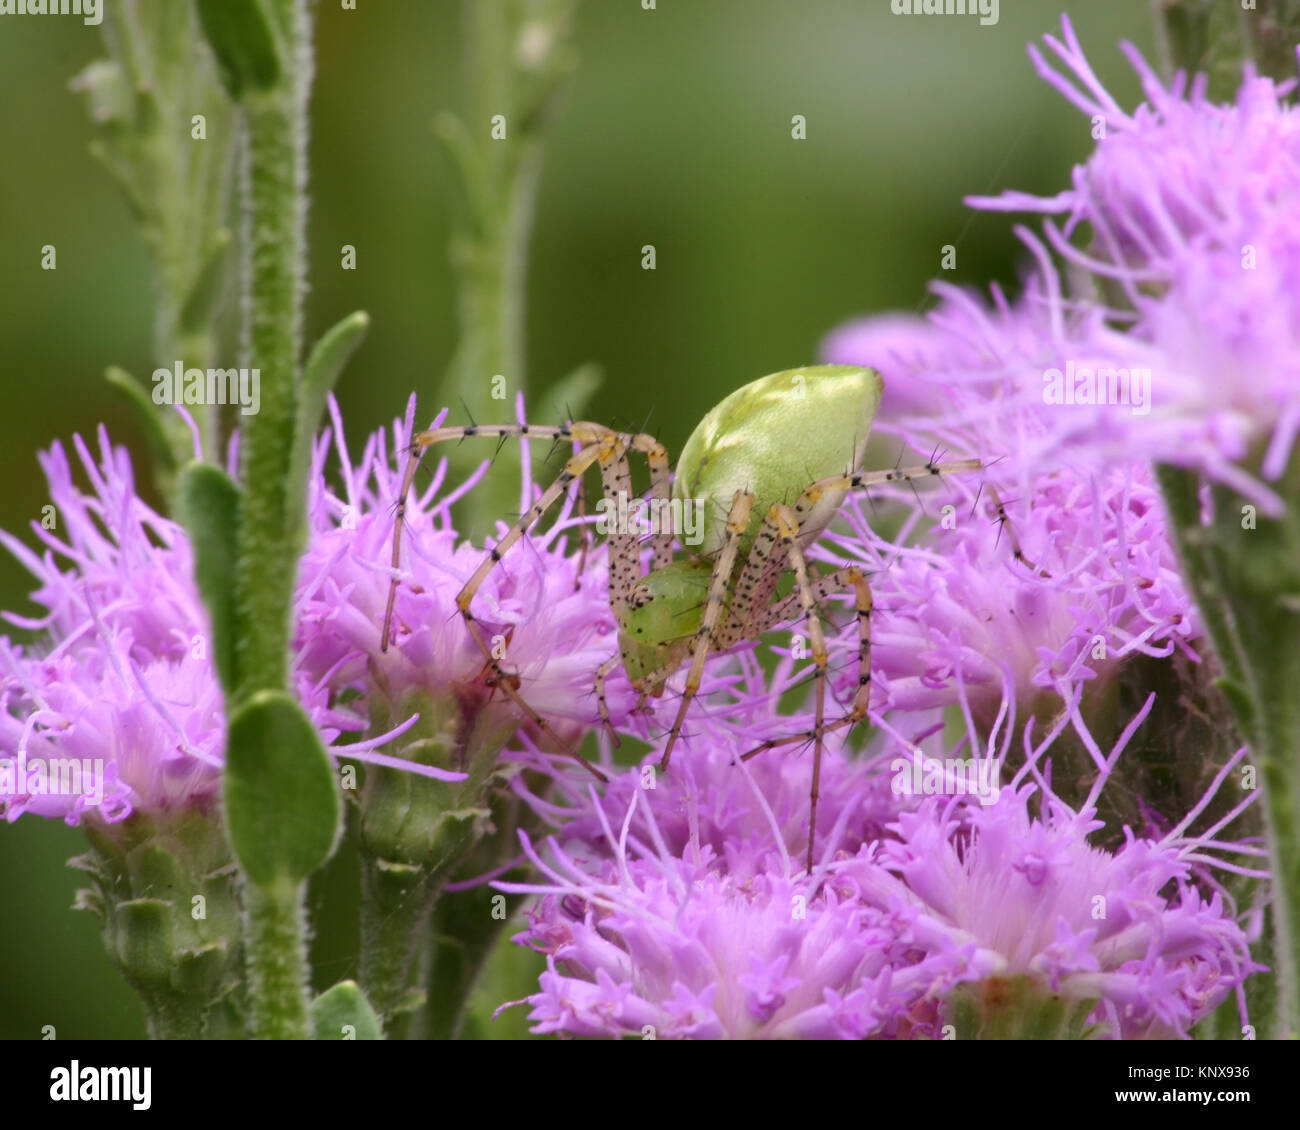 Green Lynx spider on purple Paintbrush plant shows distinctive pattern on dorsal which make these so easy to identify Stock Photo